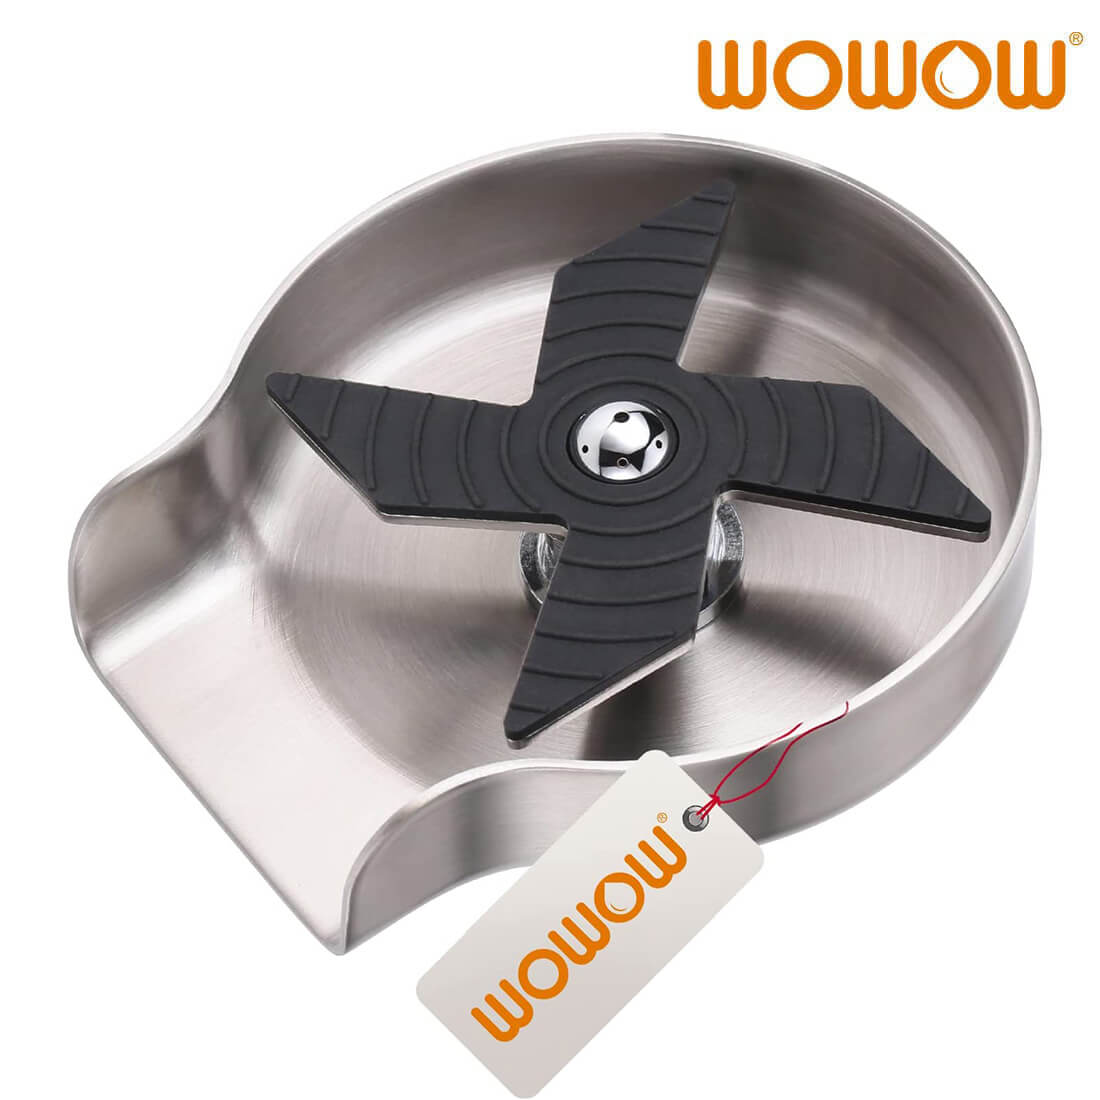 wowow brushed nickel stainless steel glass rinser 1